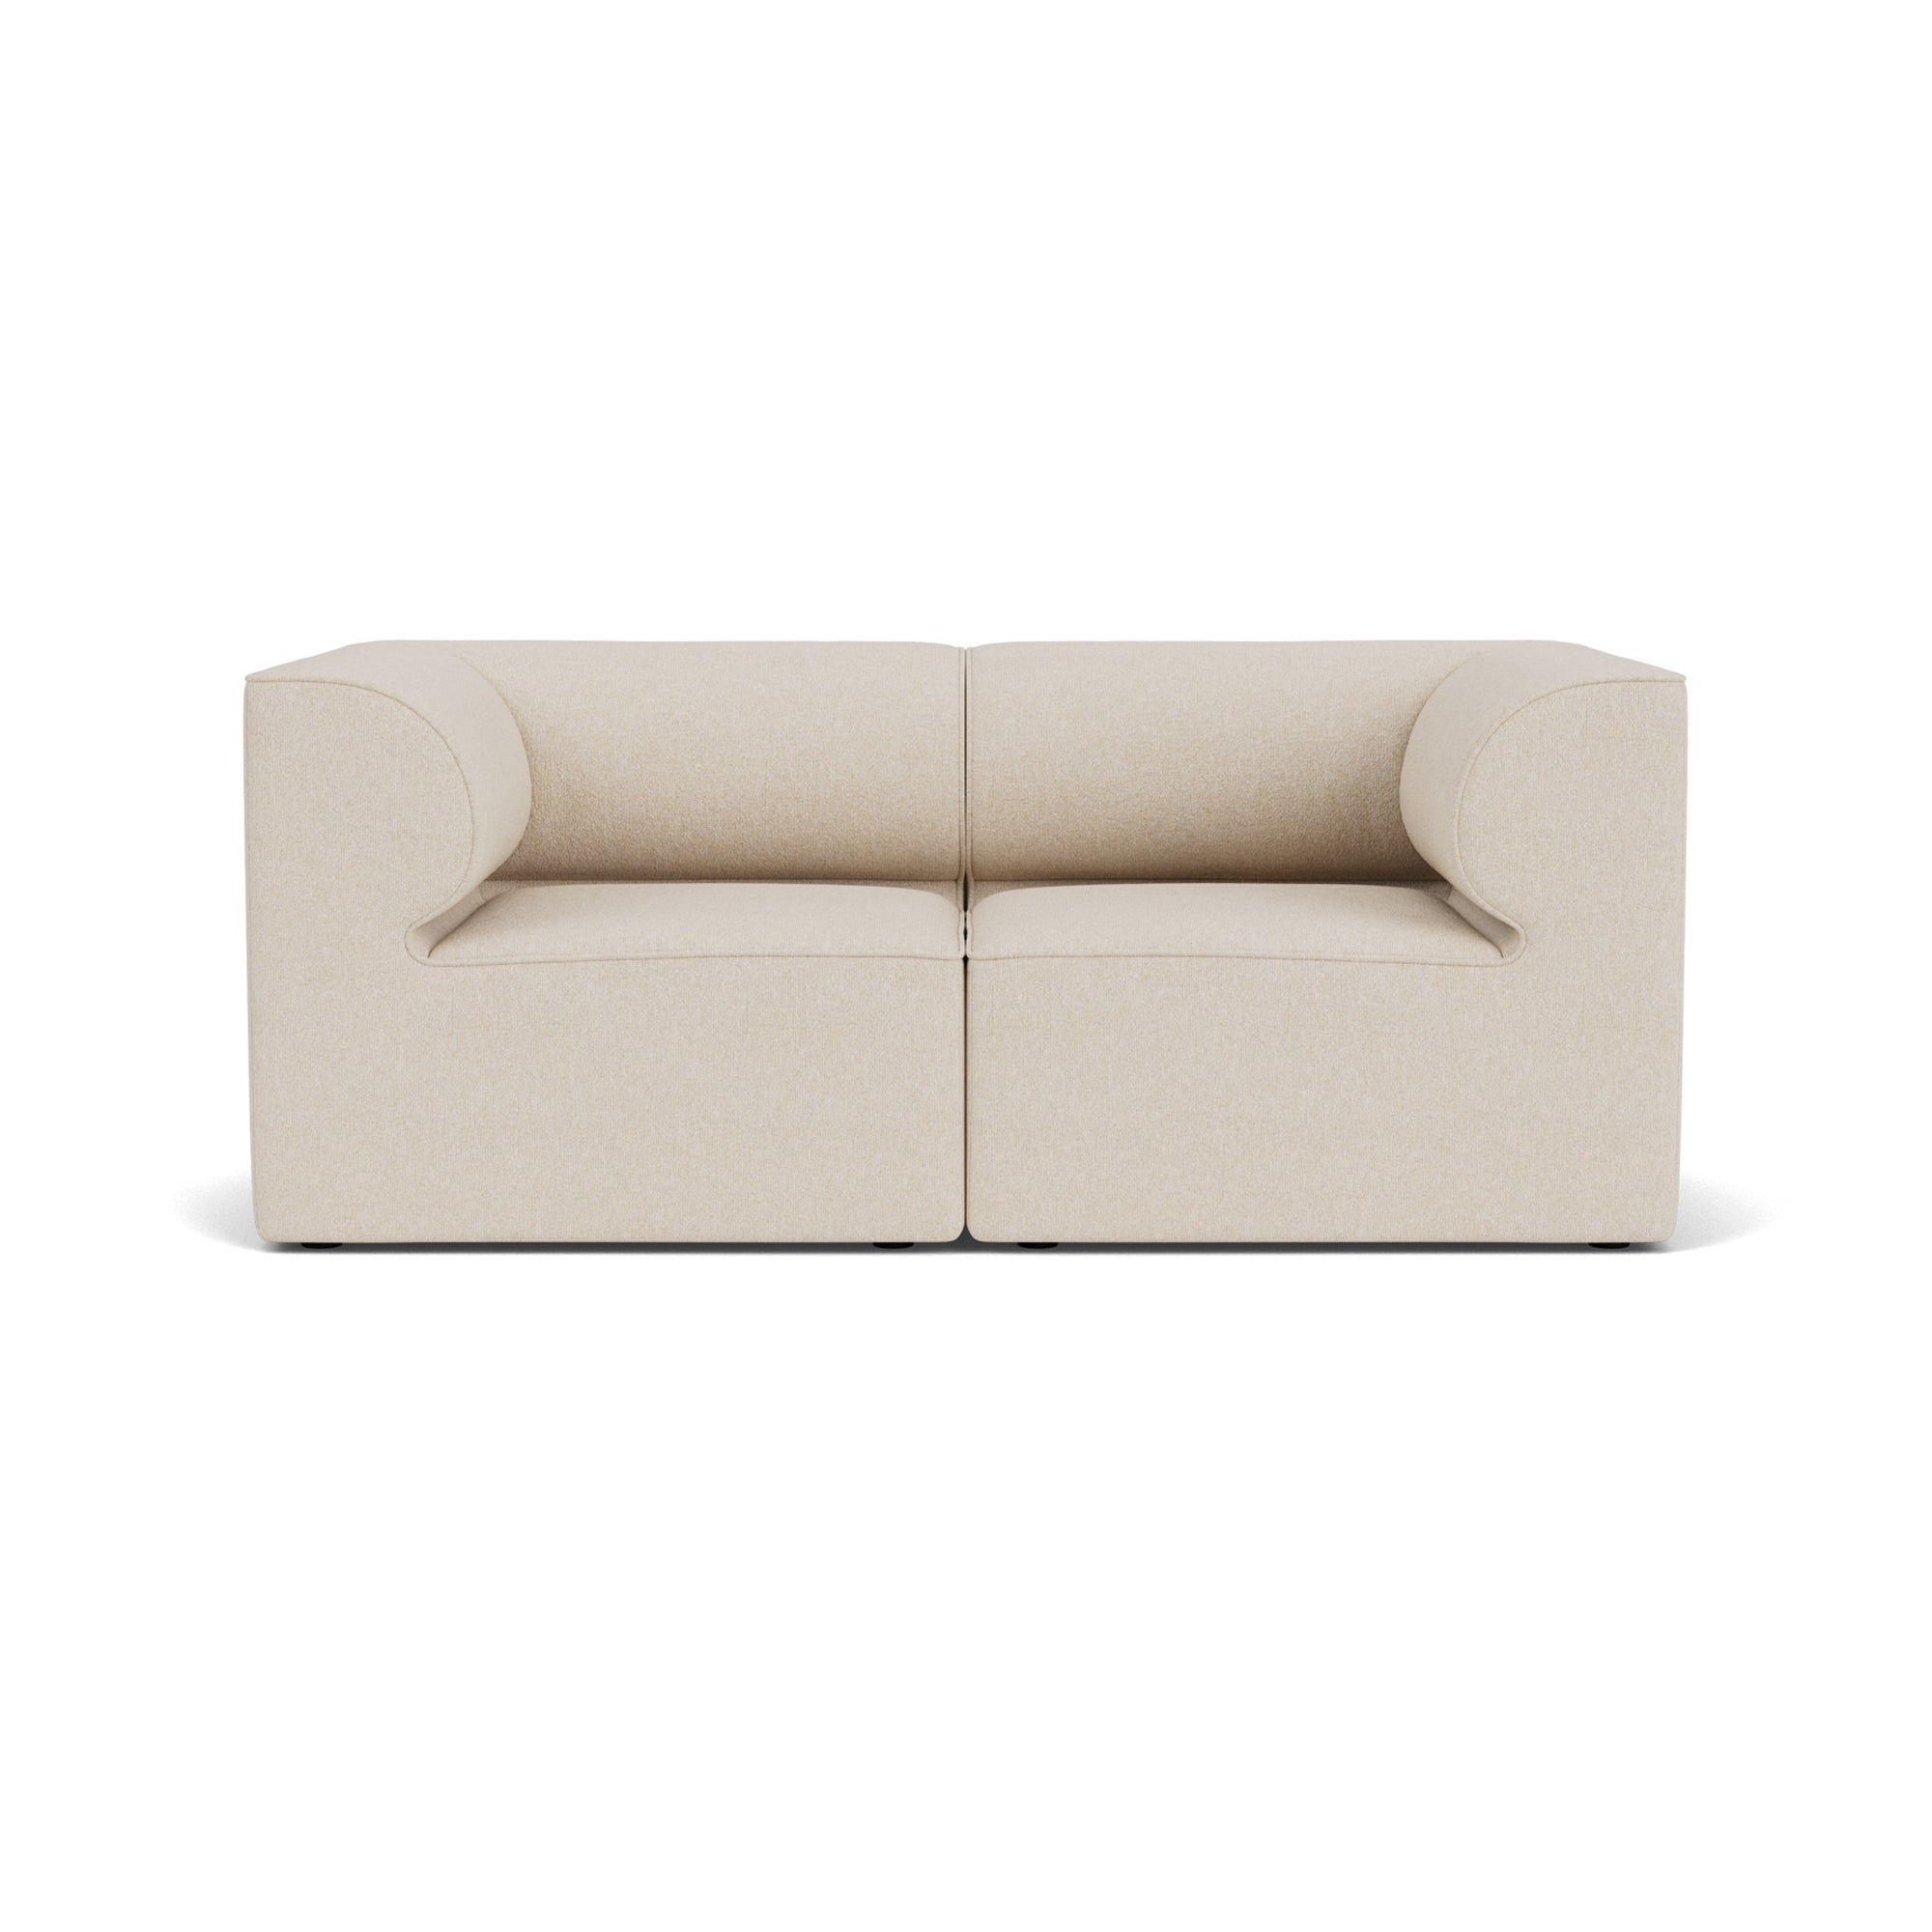 Eave Sectional Sofa 86 2 Seater